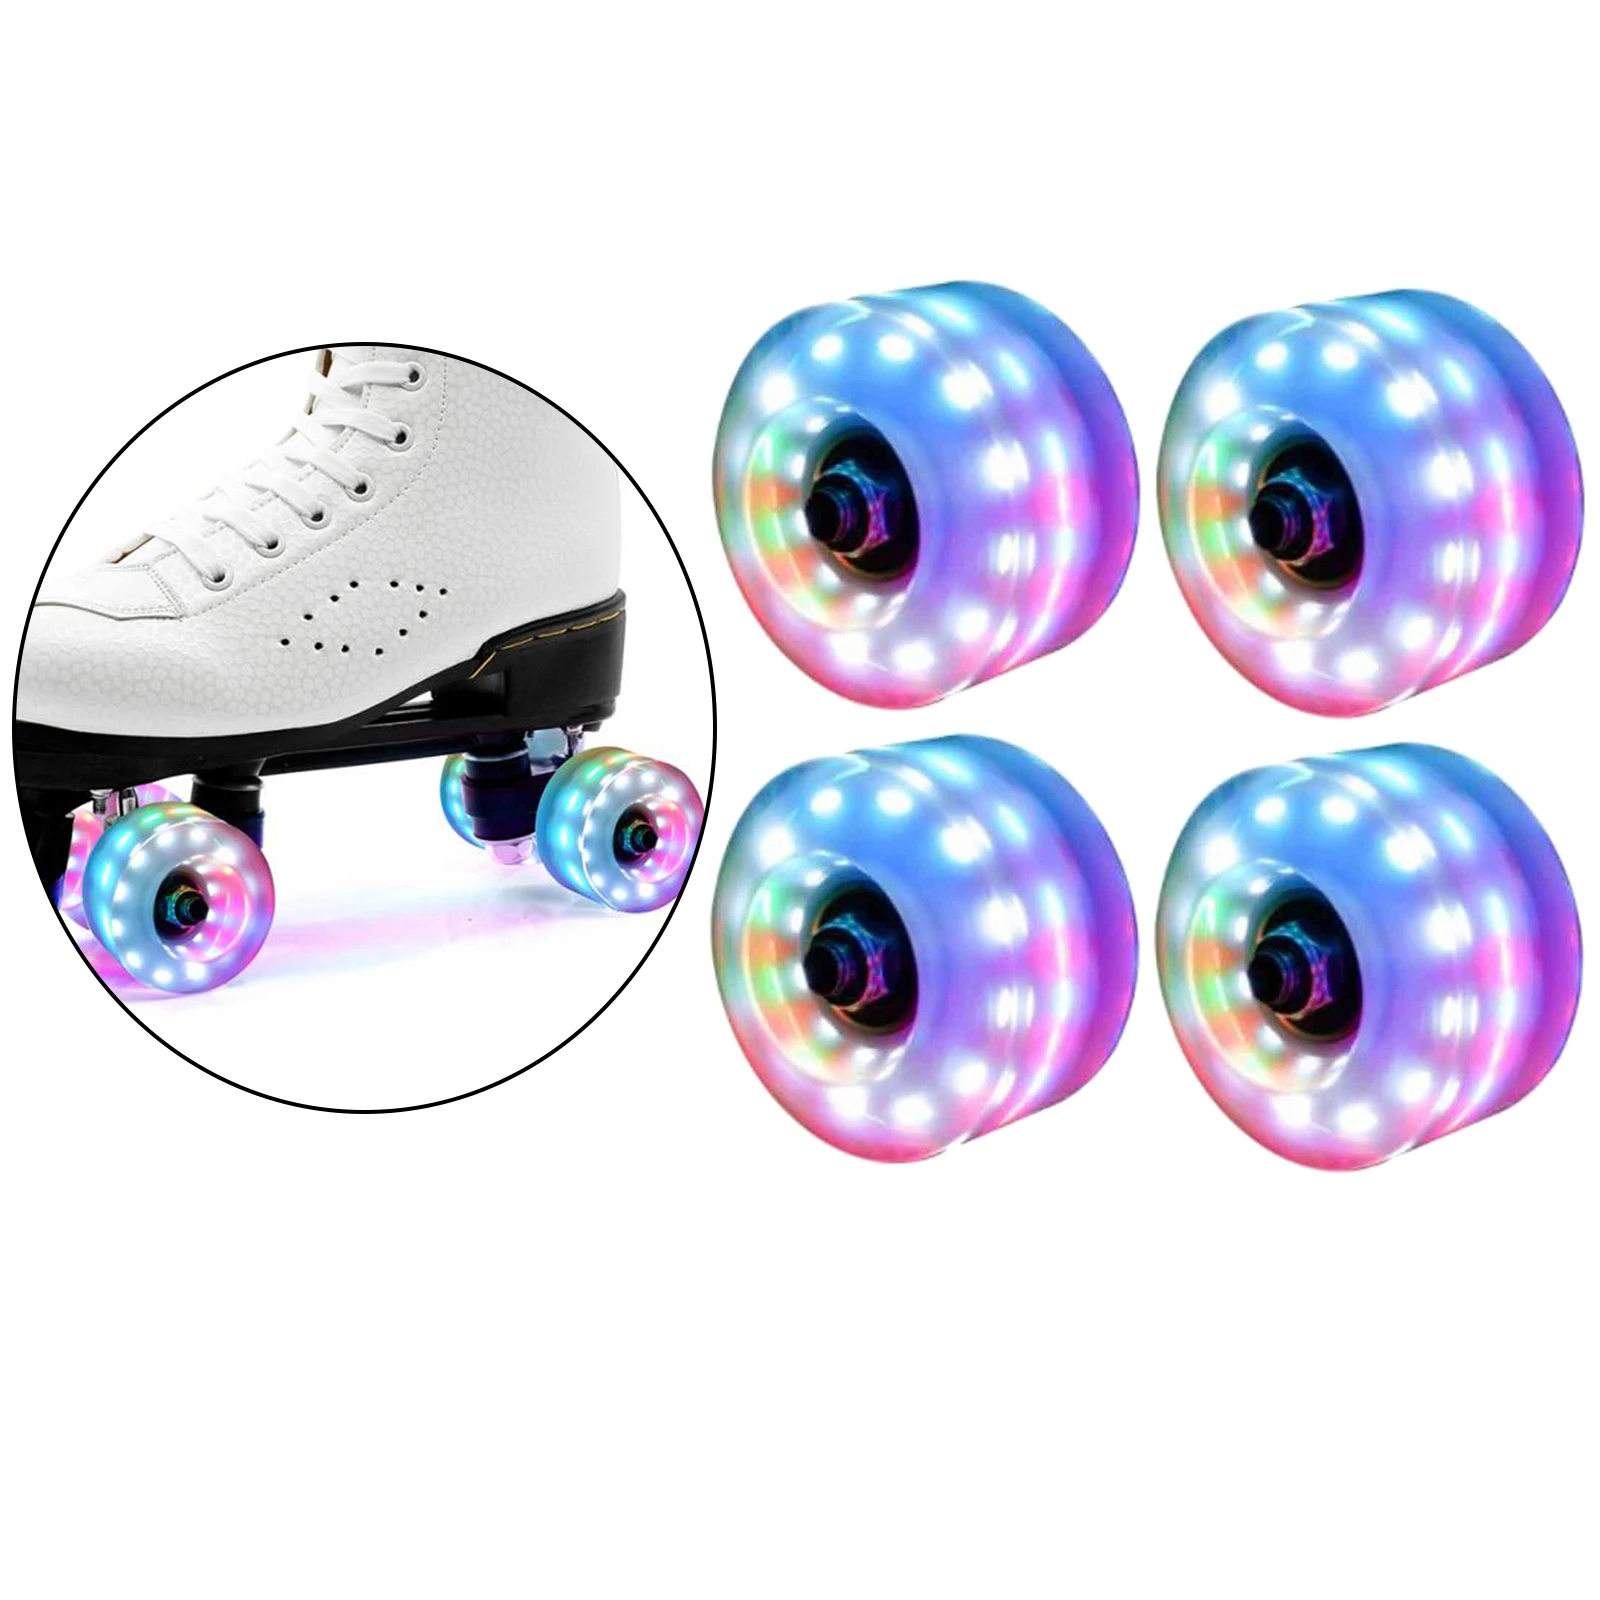 CALIDAKA ller Skate Wheels 4pcs Sliding Led Skating for Adults Kids Light Up Luminous Outdoor with Bankll Beas PU Double w Transparent Accessories Blue 